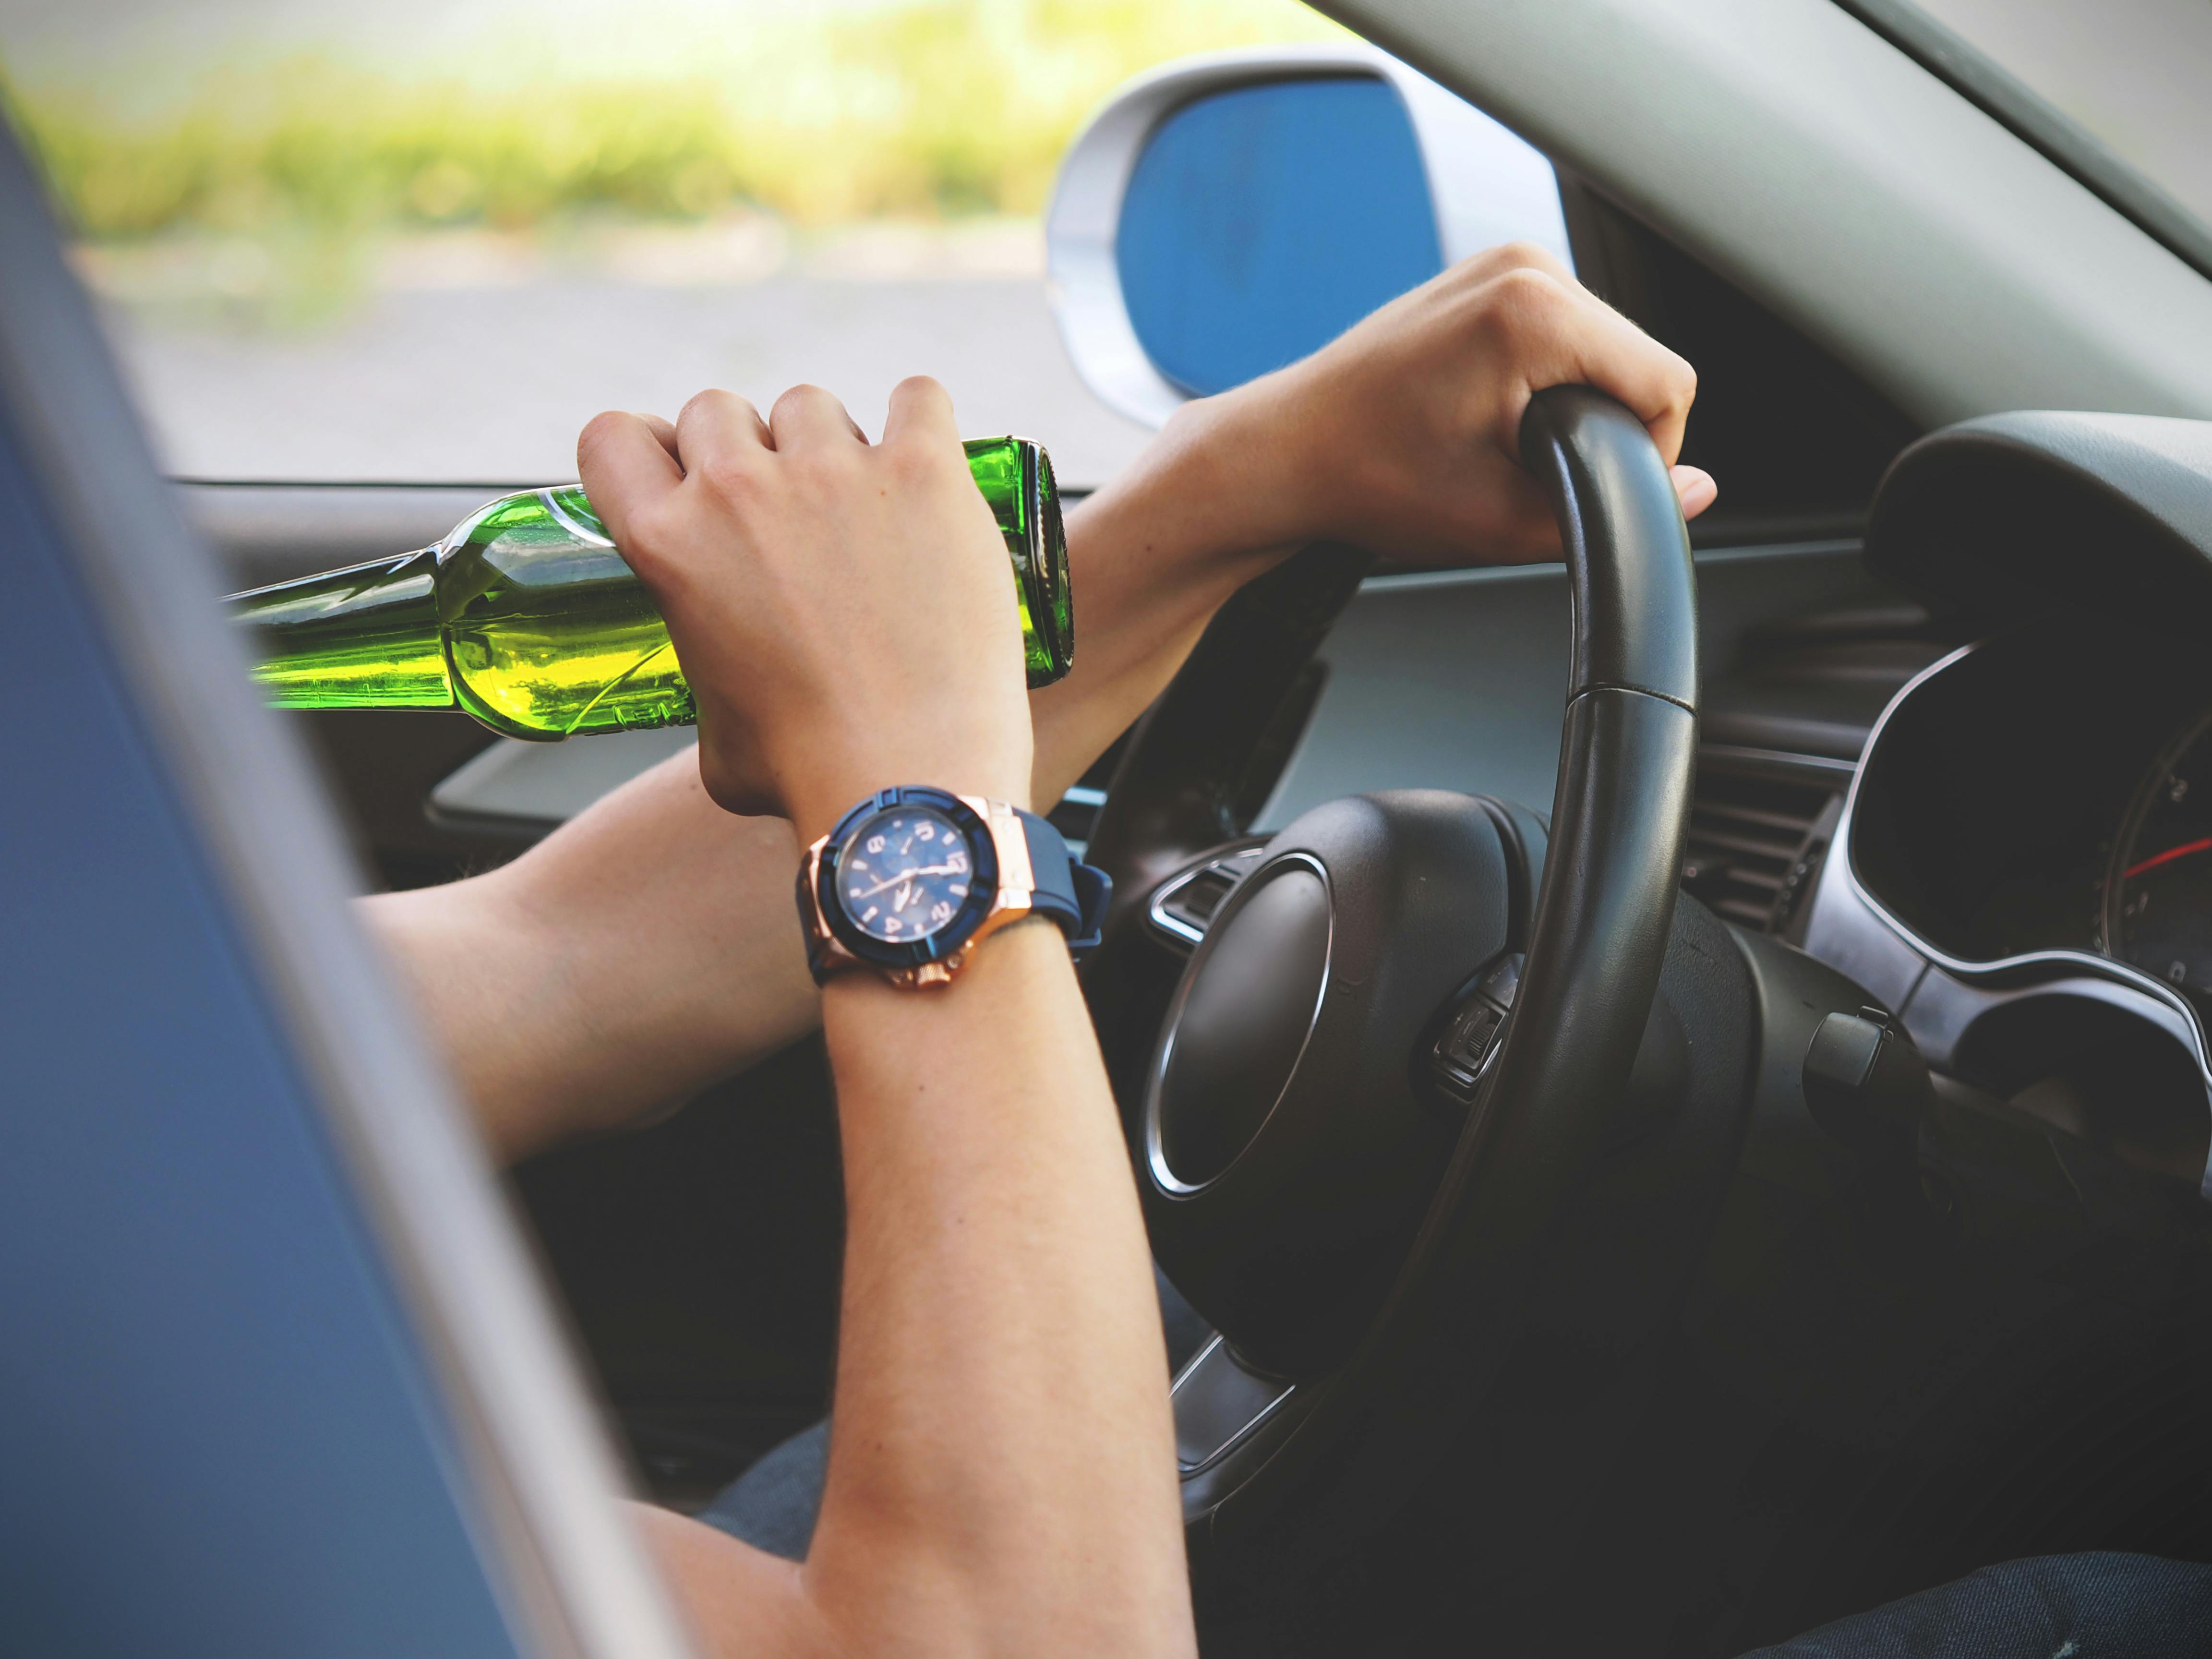 Man driving his car while drinking a soft drink. | Photo: Pexels